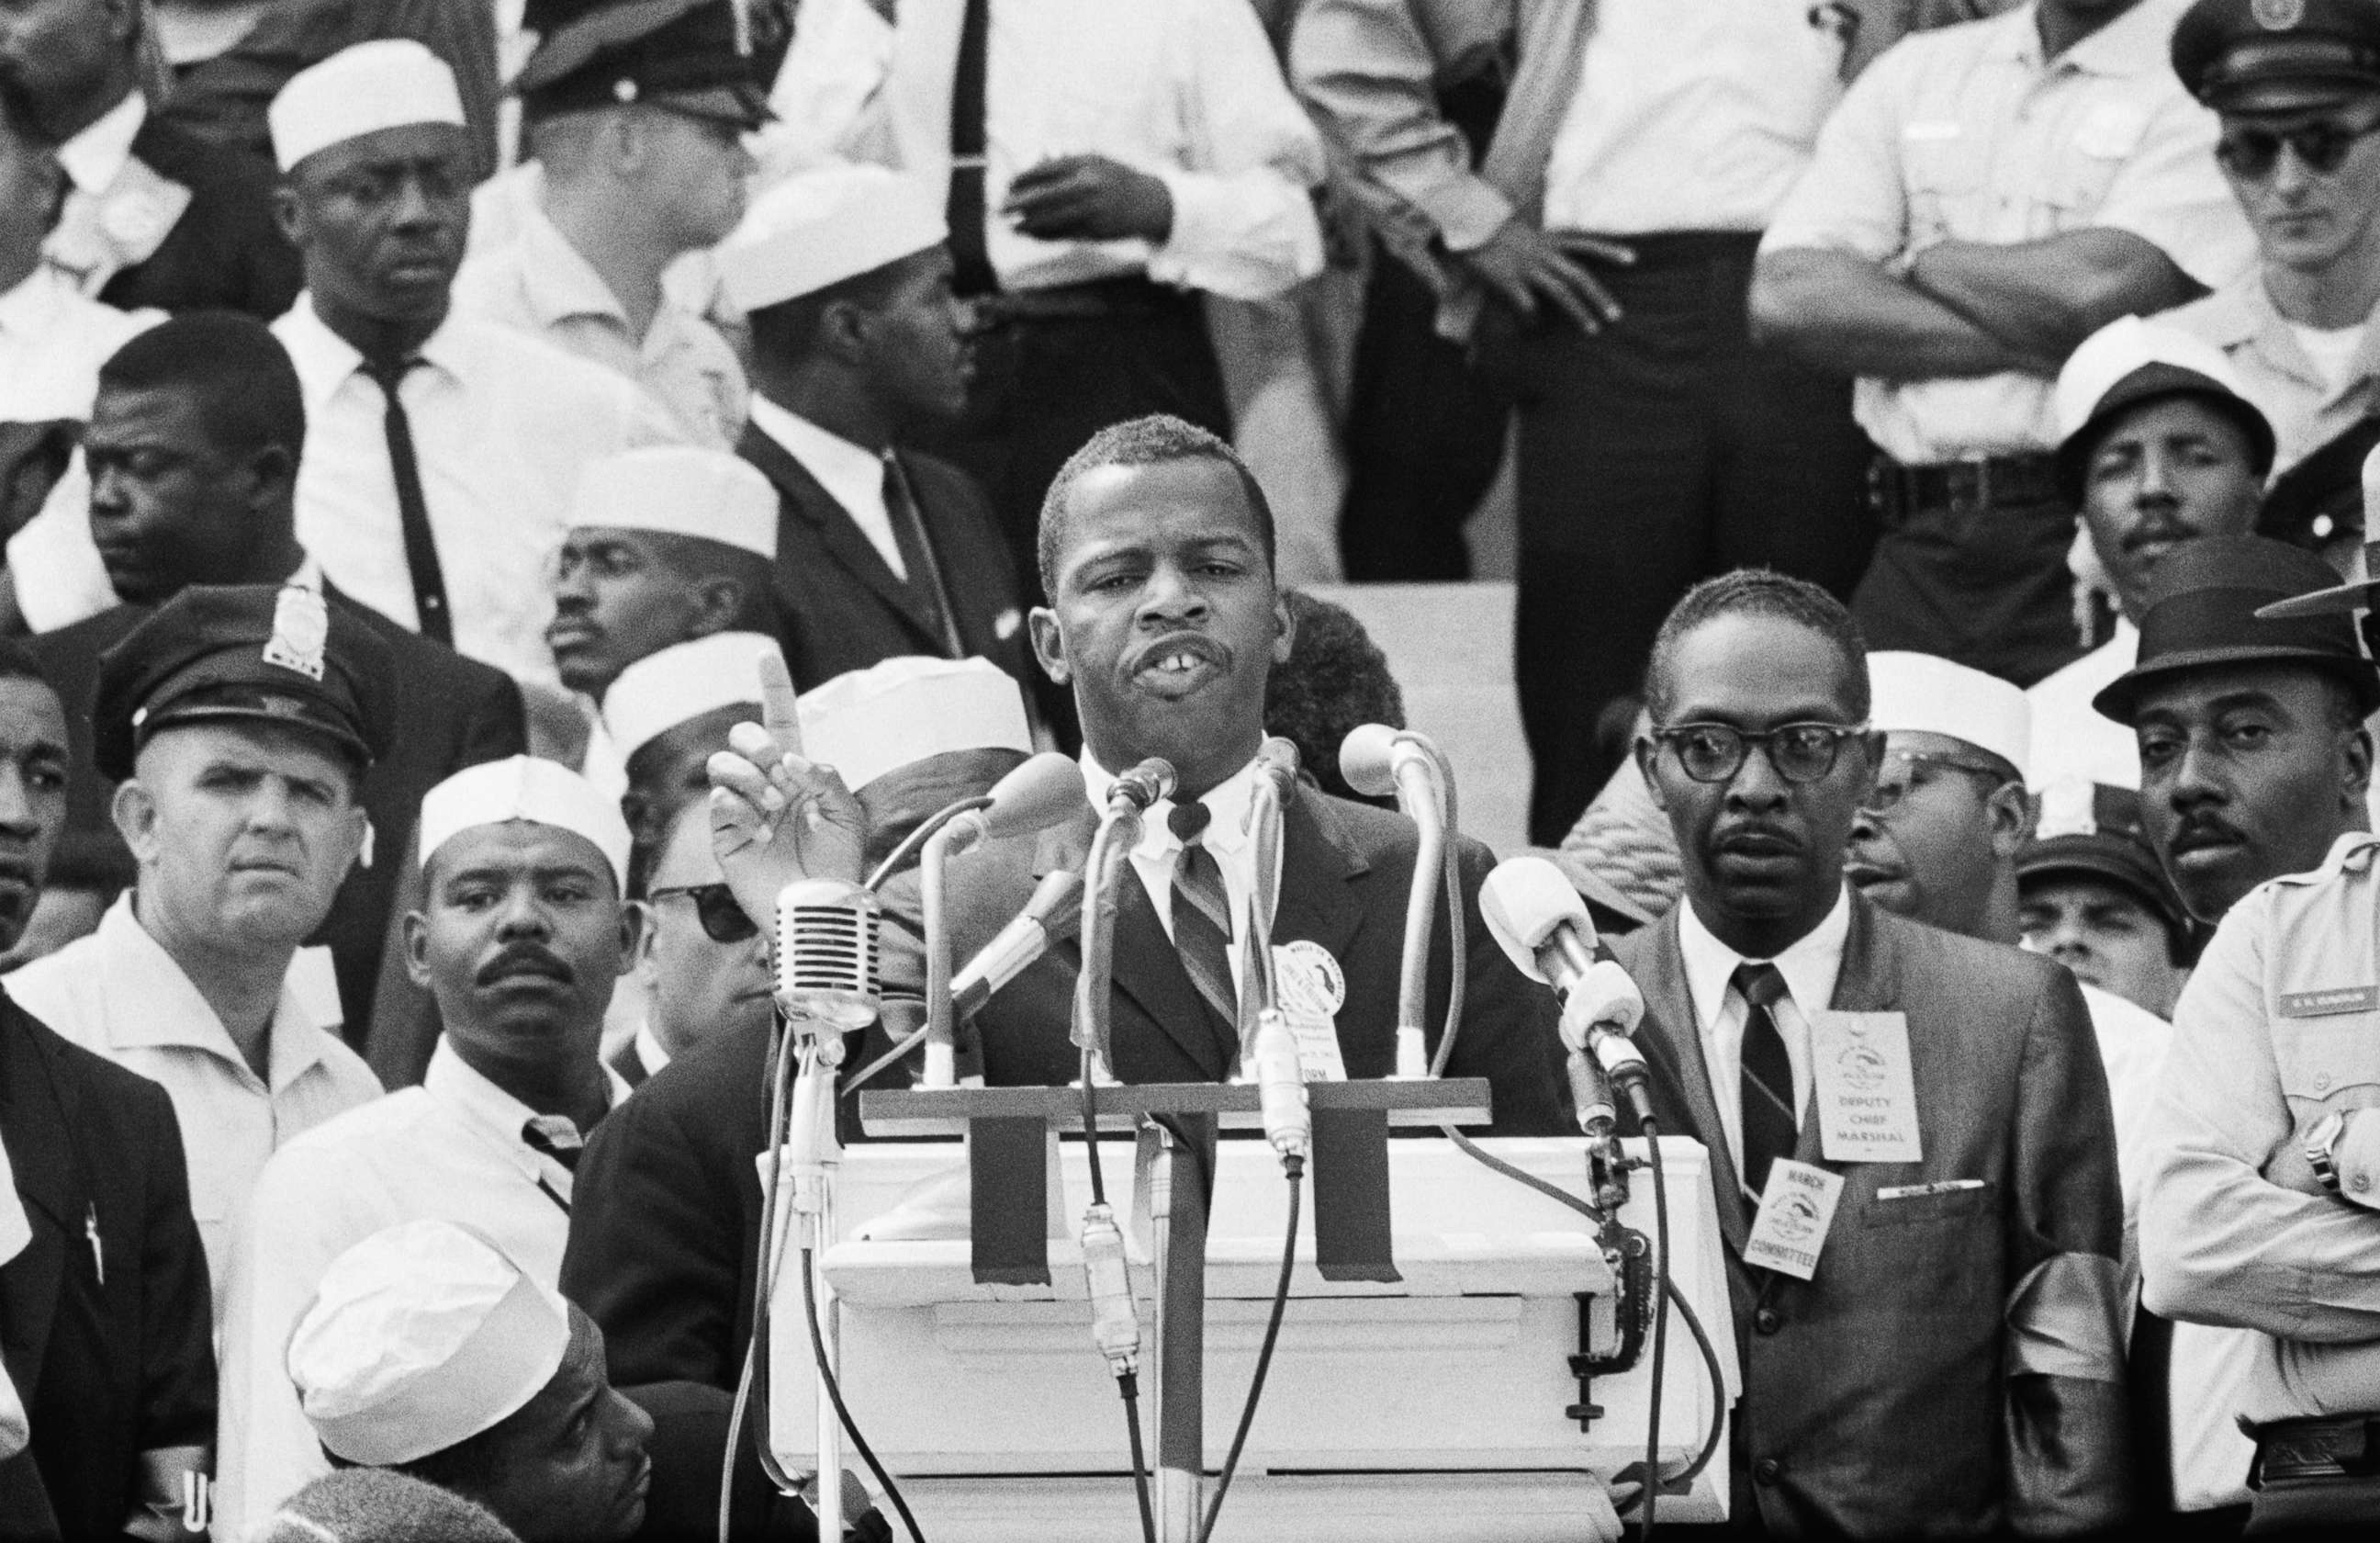 PHOTO: John Lewis, Chairman of the Student Non-Violent Coordinating Committee, speaks at the March on Washington, Aug. 28, 1963, on the steps of the Lincoln Memorial in Washington, D.C.